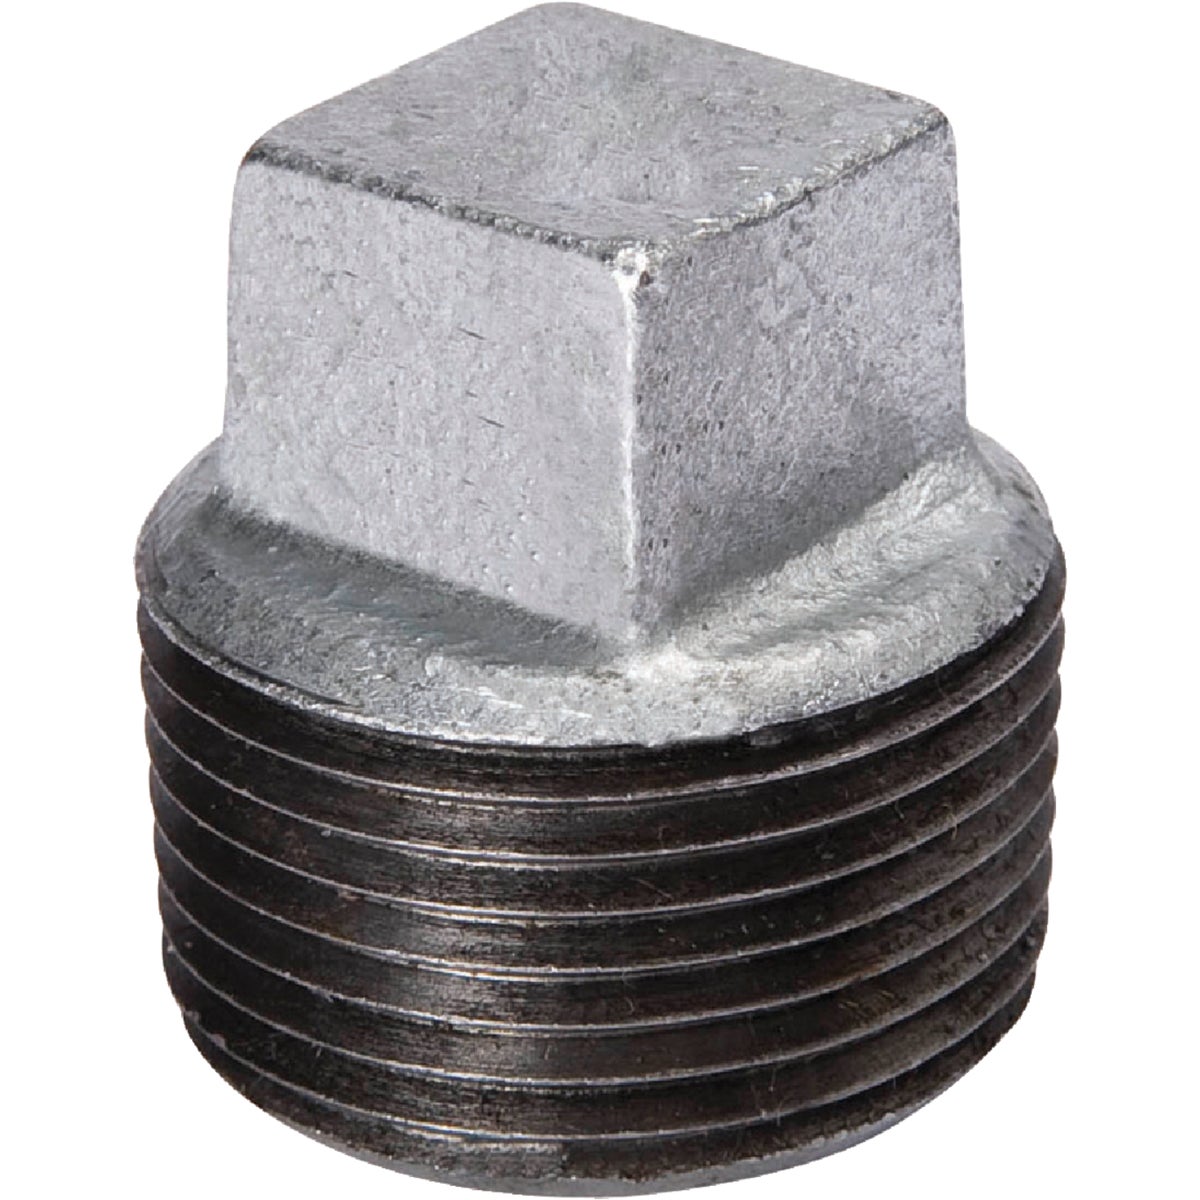 Southland 3/4 In. Malleable Iron Galvanized Plug